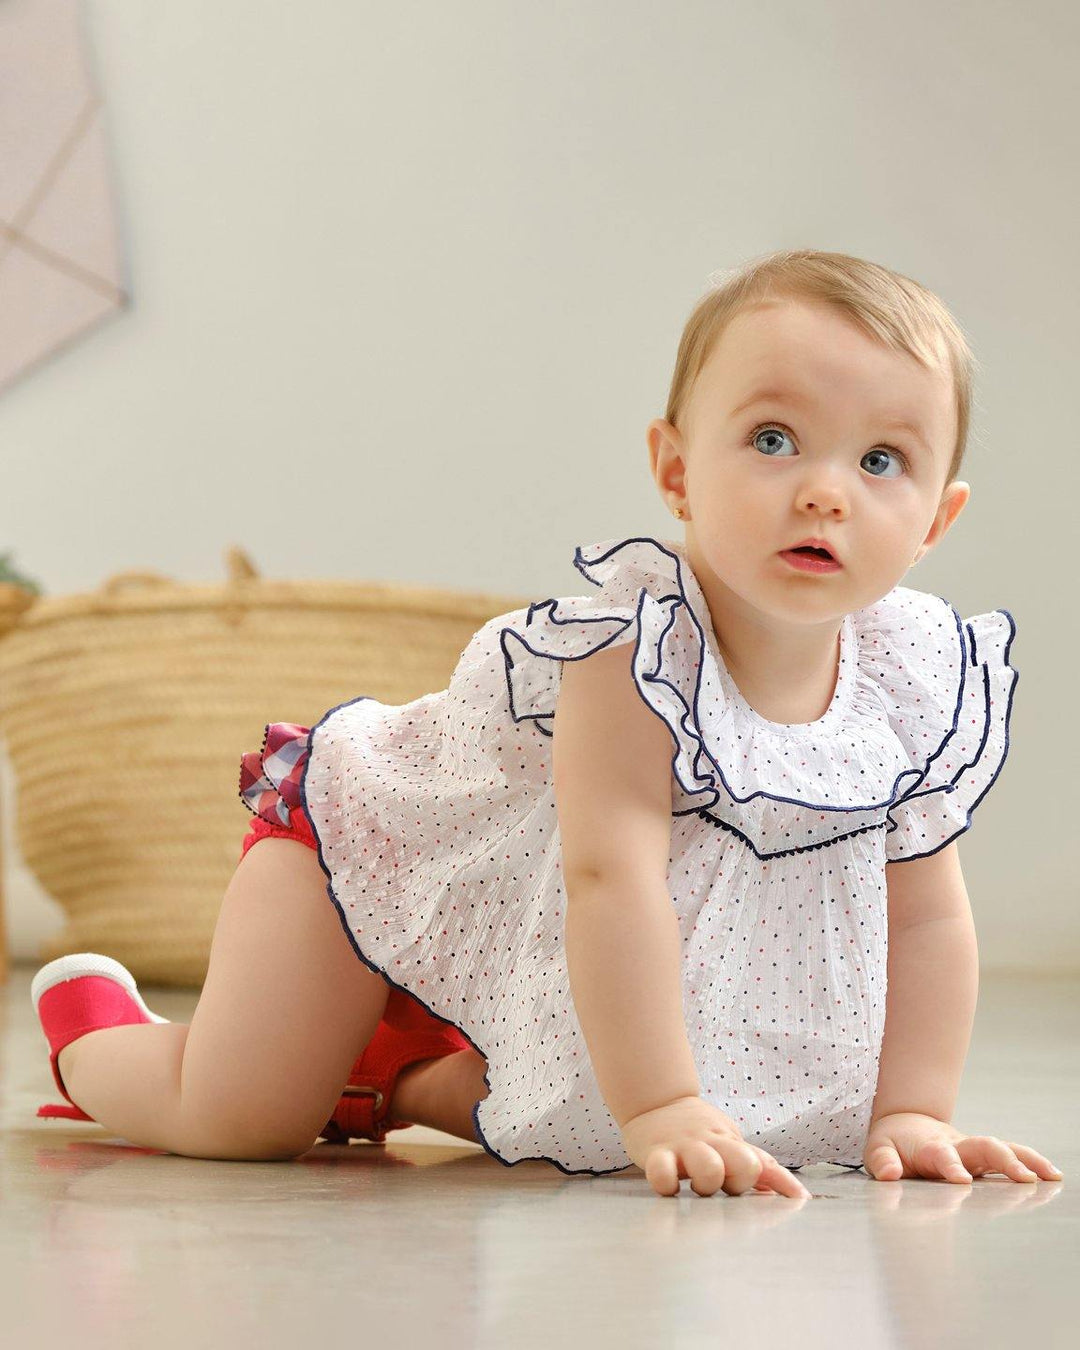 Tutto Piccolo "Blair" Red & Navy Polka Dot Blouse & Bloomers | Millie and John